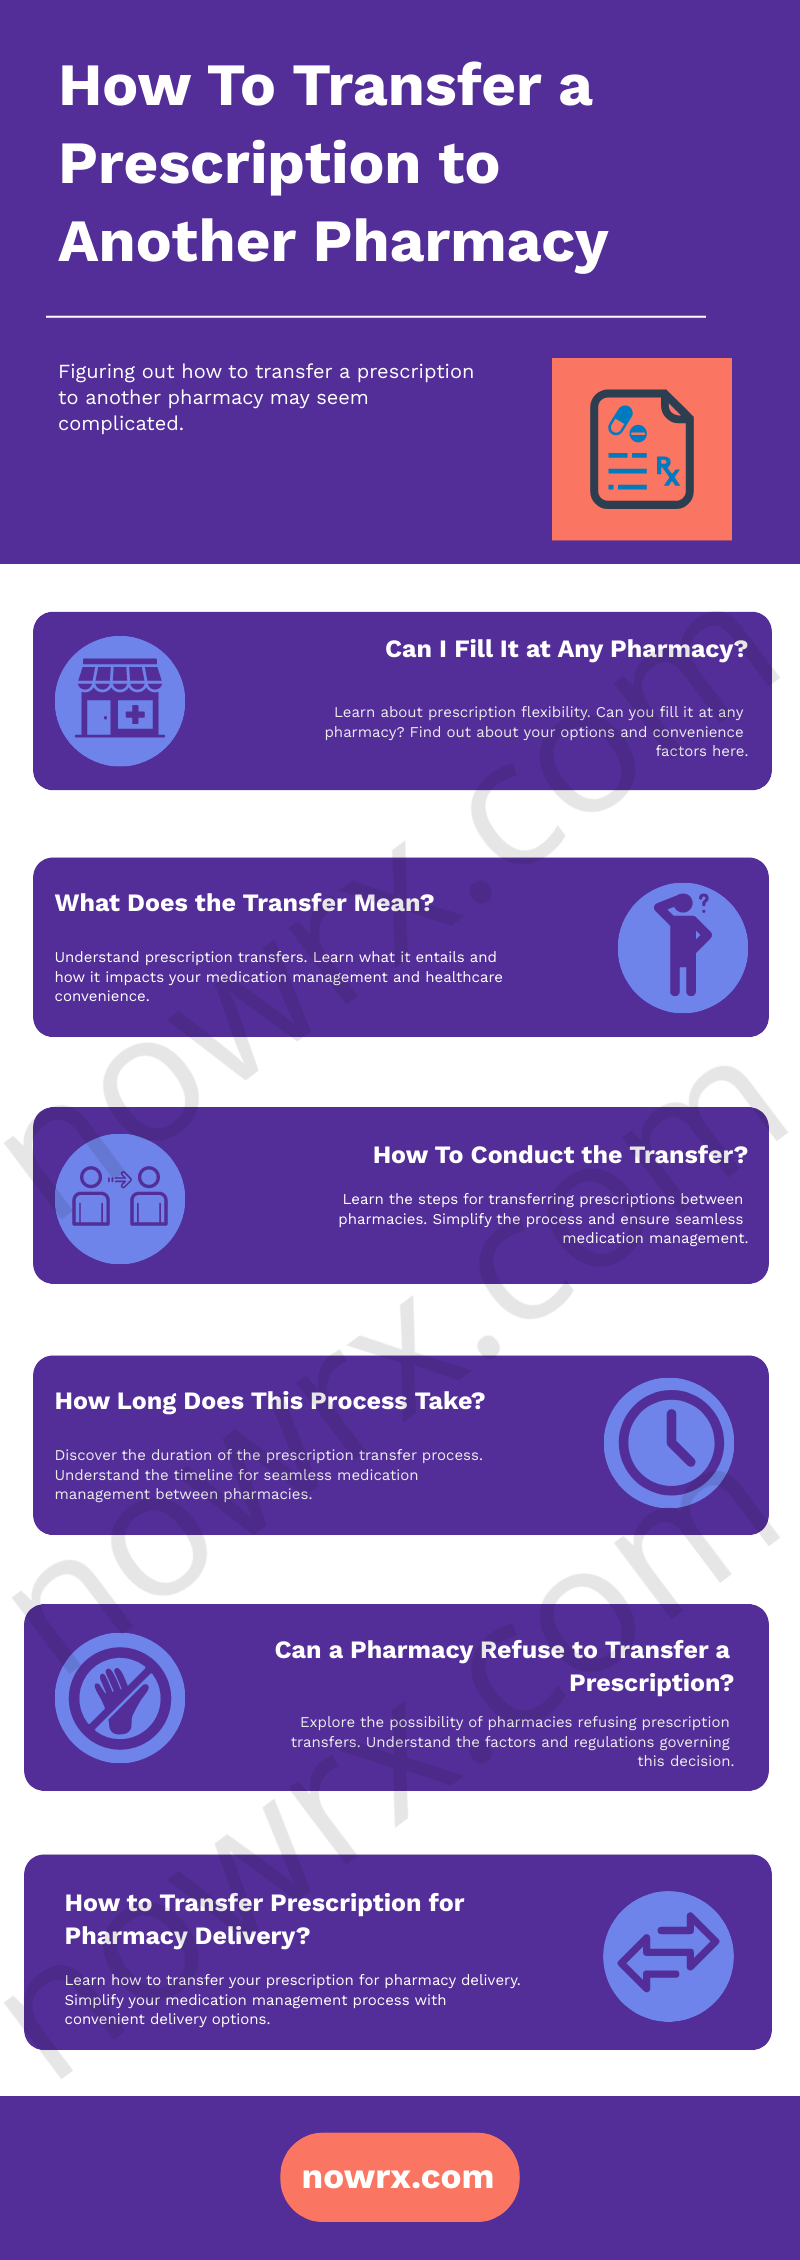 this infographic show how to transfer a prescription to another pharmacy